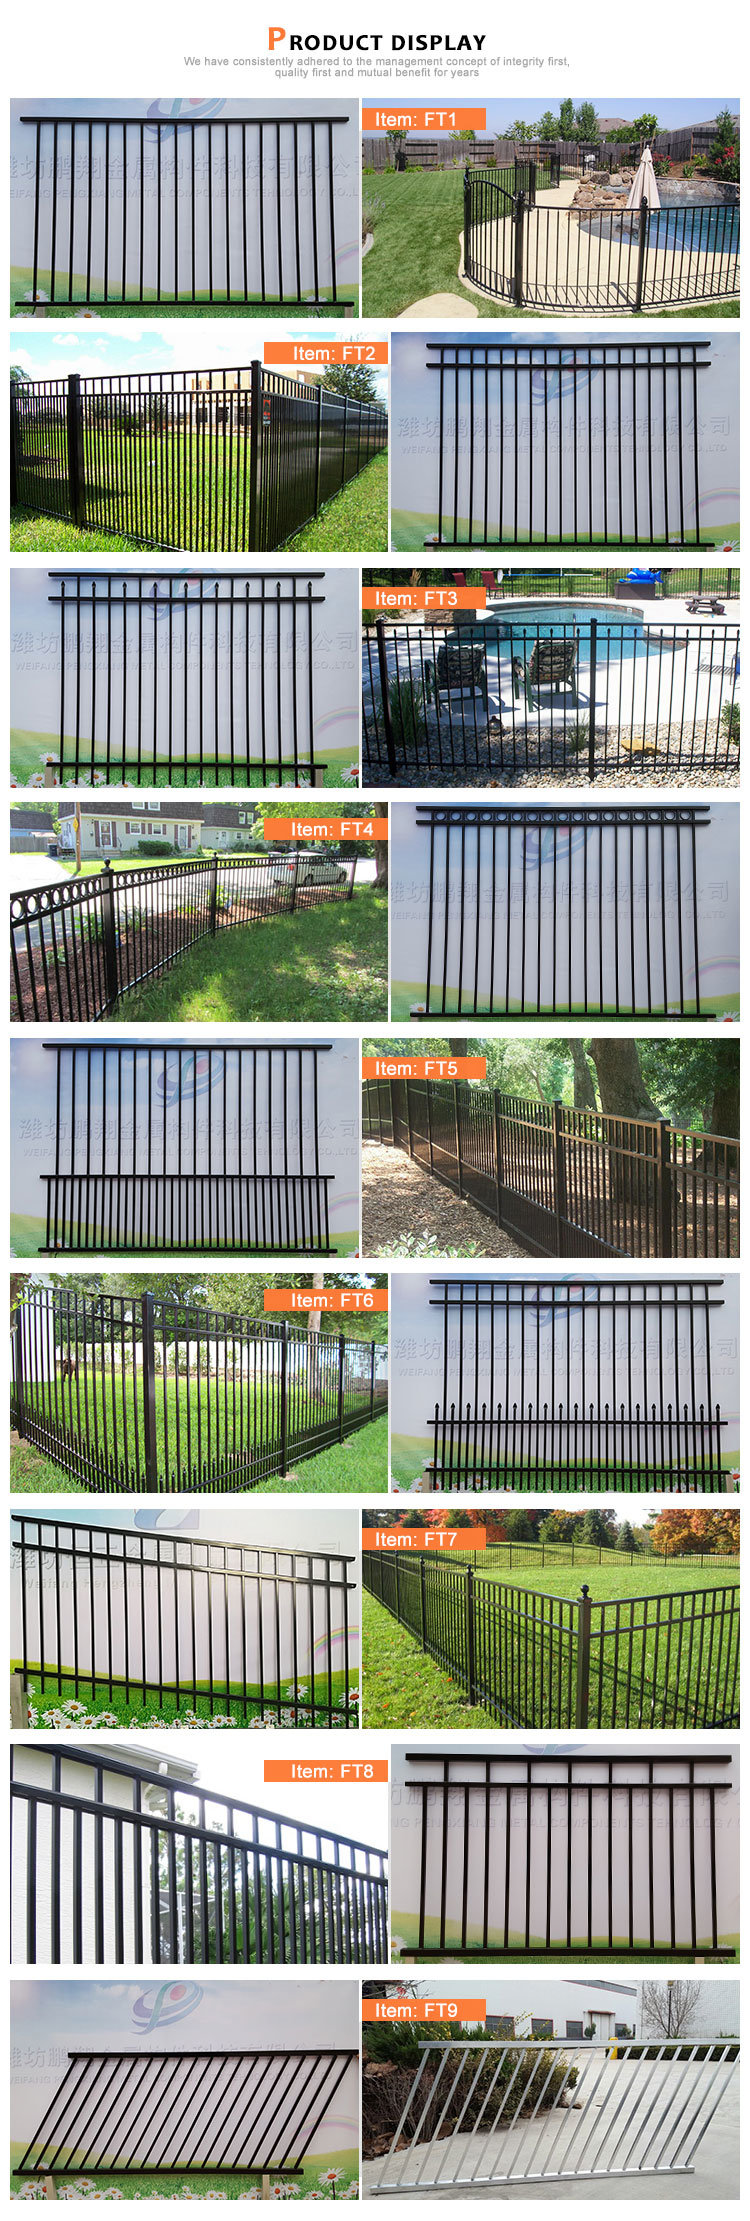 Artical Welded Outdoor Wrought Iron Fence for Garden Residential House